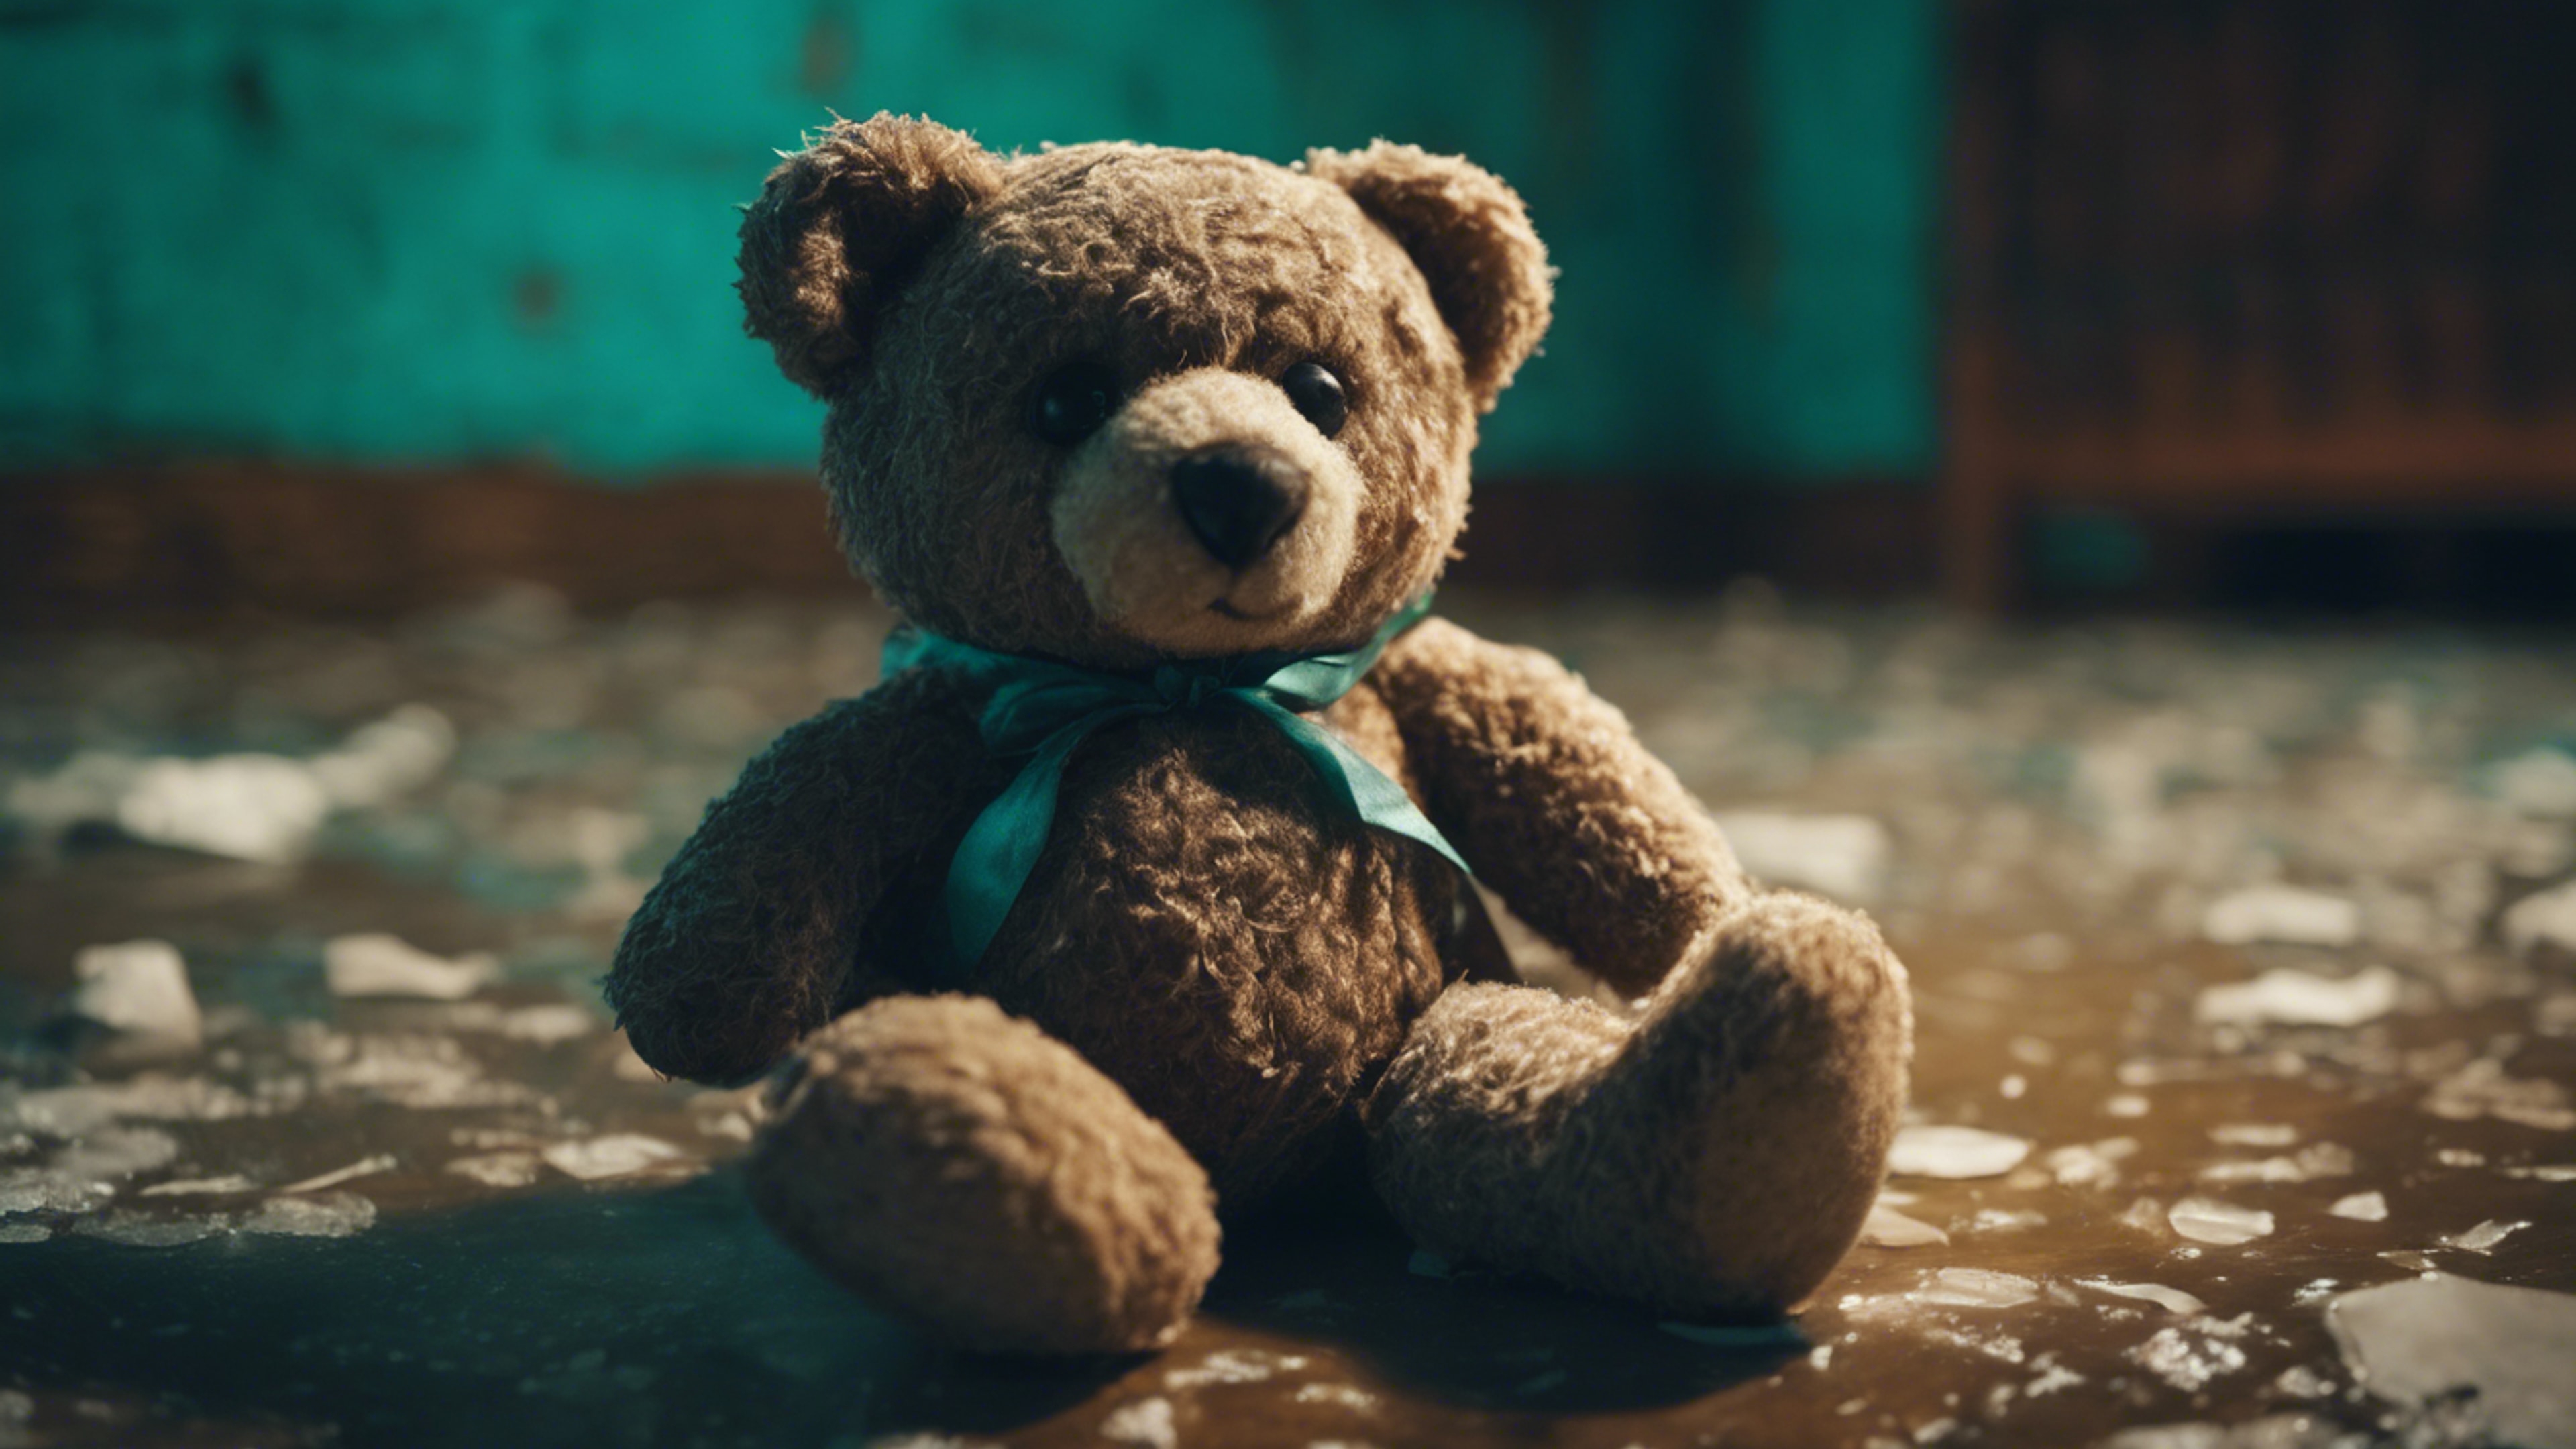 An orphaned gothic teddy bear lying in a quiet abandoned room illuminated in teal. 벽지[f4613294cb5e4a2b934c]